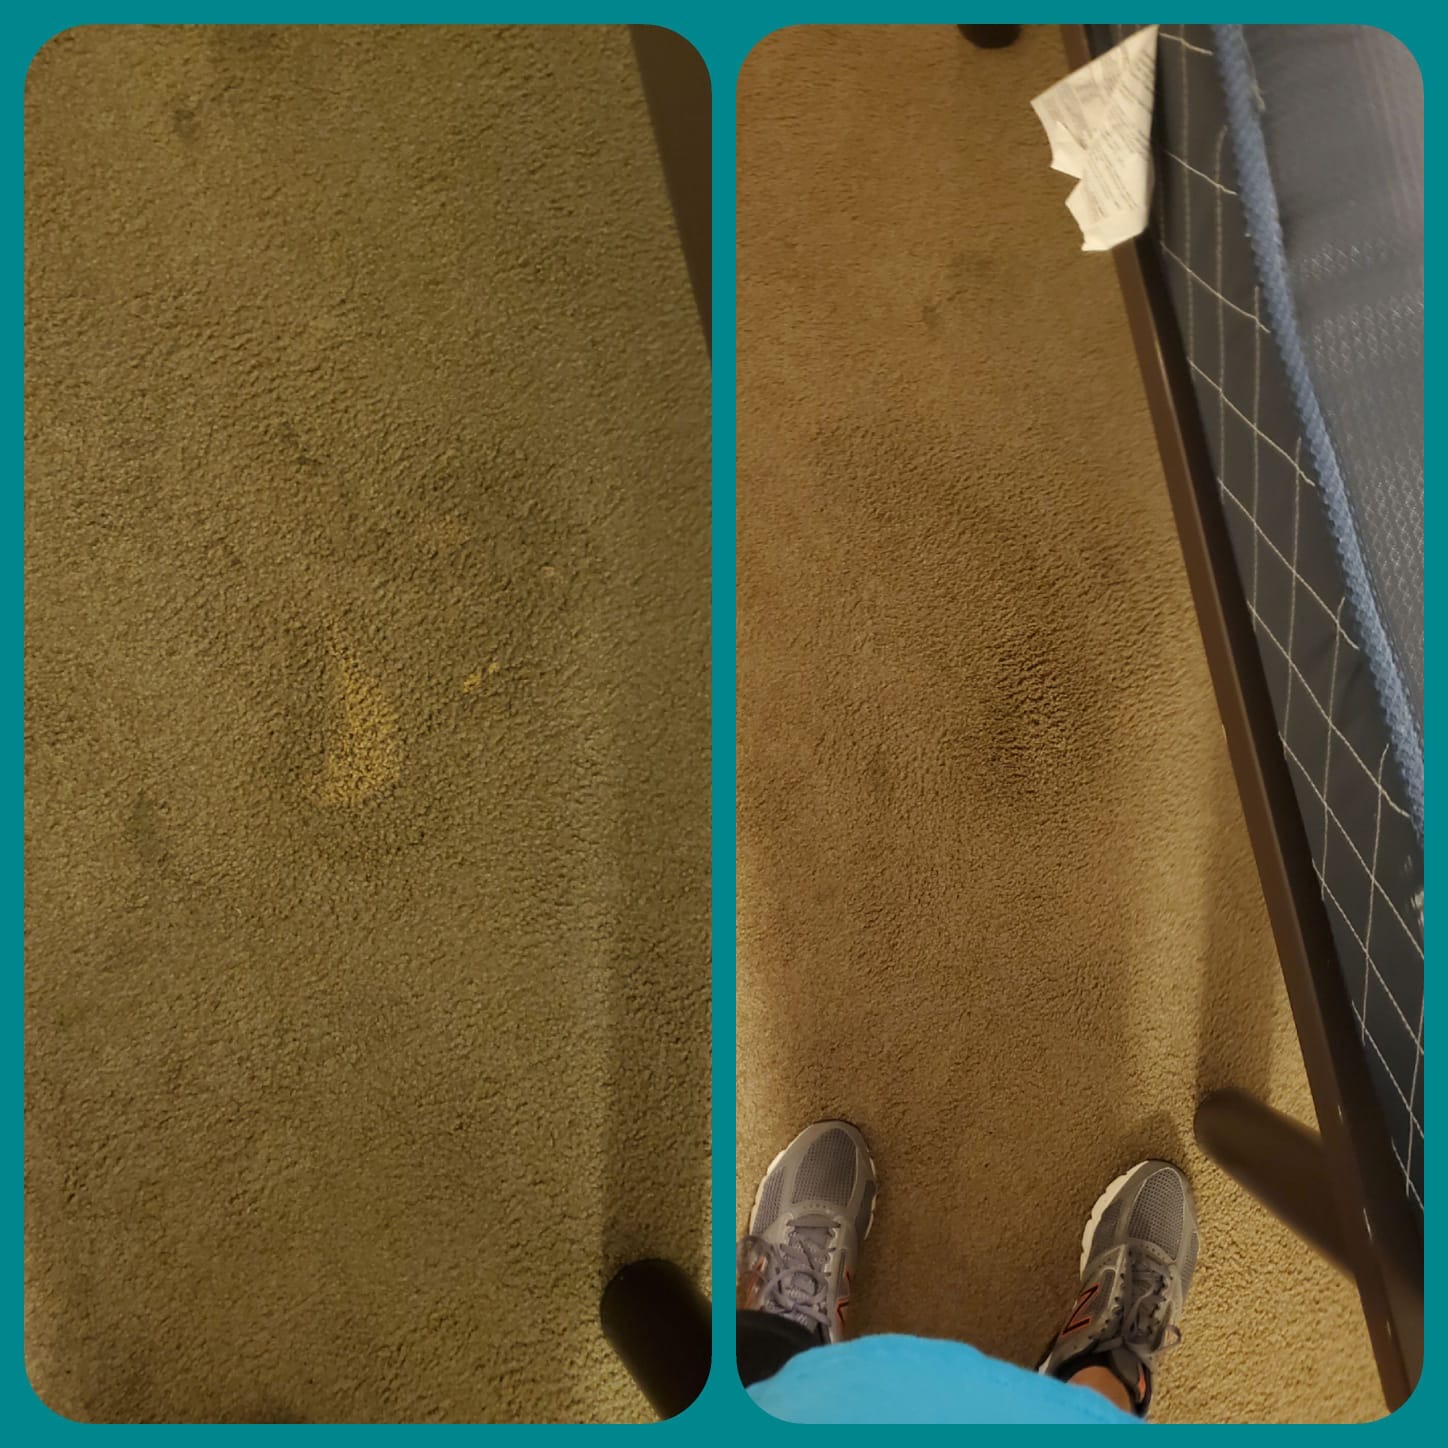 Bleach Spot Repair in Cleveland, OH College Suites